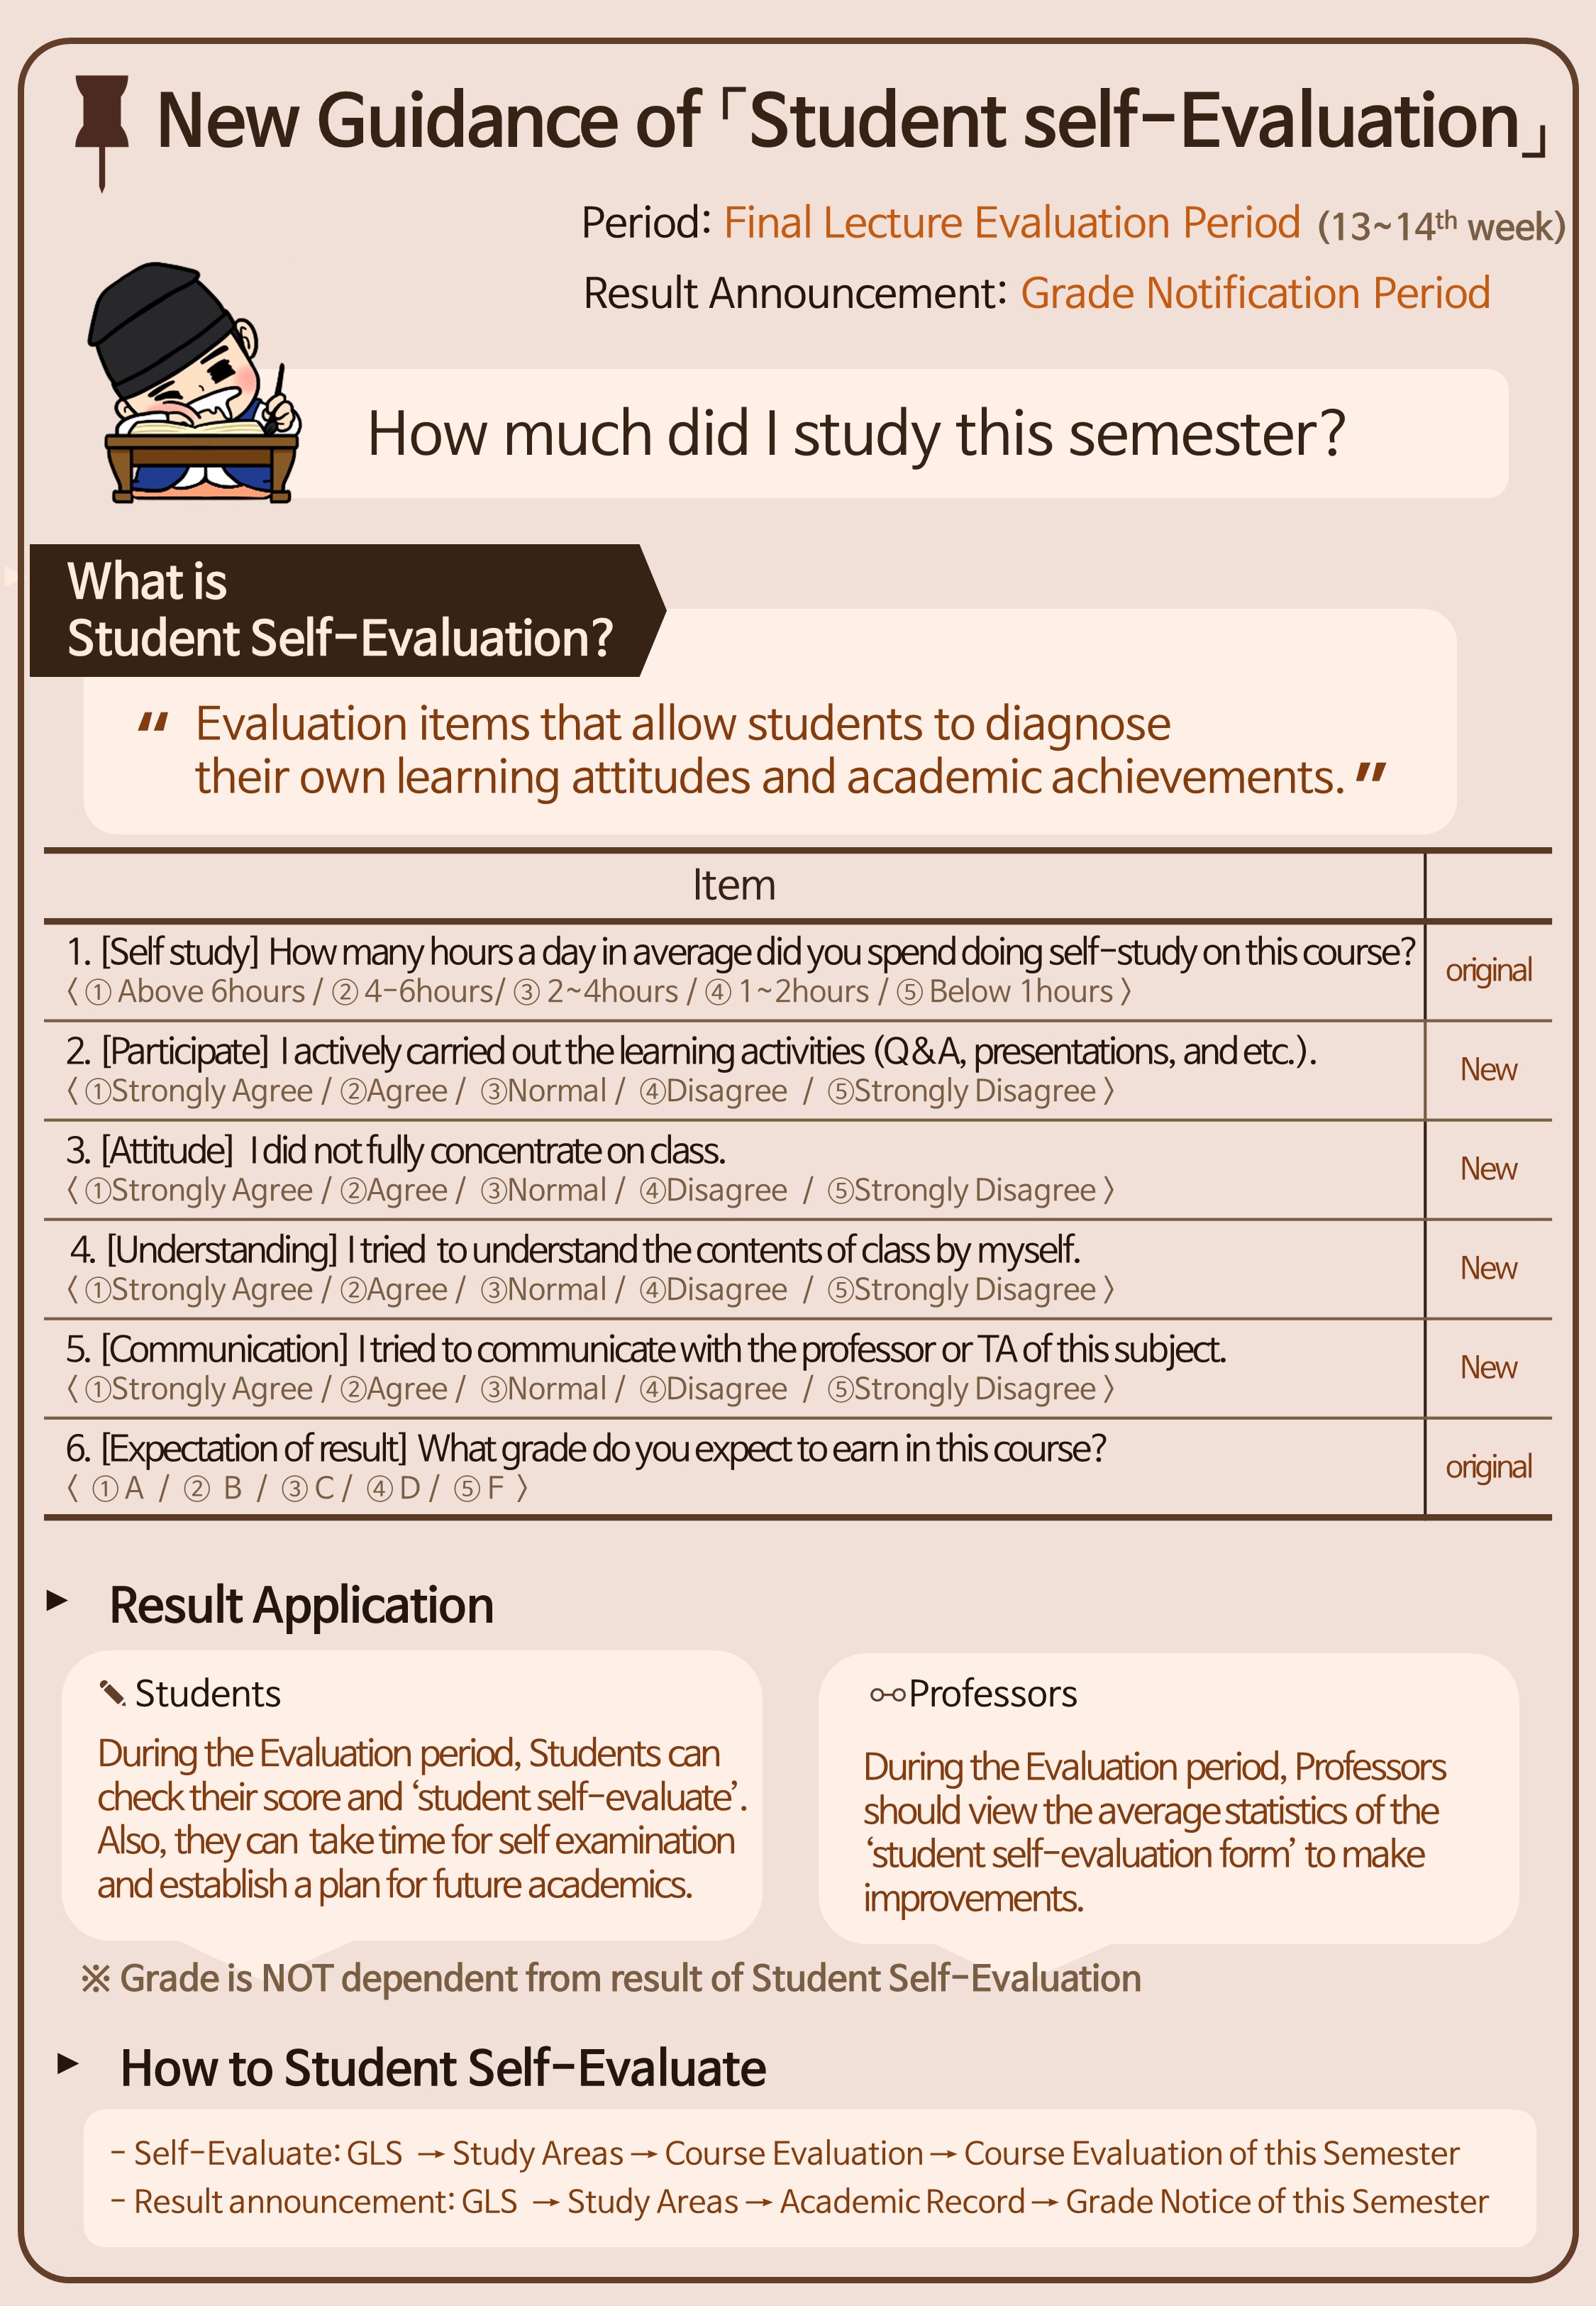 New Guidance of Student Self-Evaluation